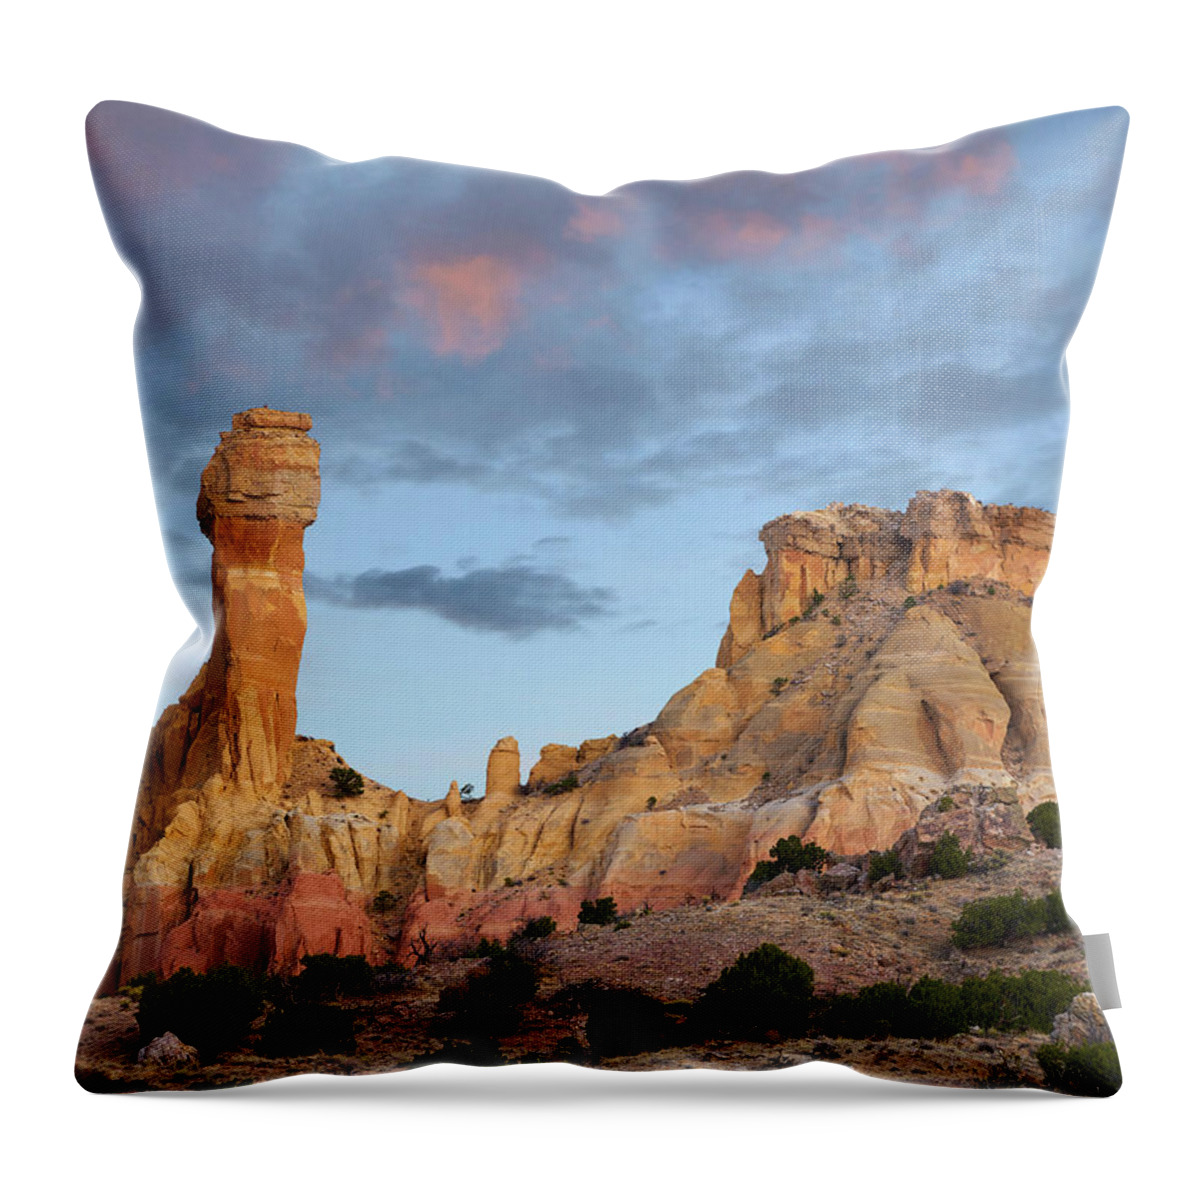 00559643 Throw Pillow featuring the photograph Chimney Rock Dawn, Ghost Ranch, New Mexico by Tim Fitzharris